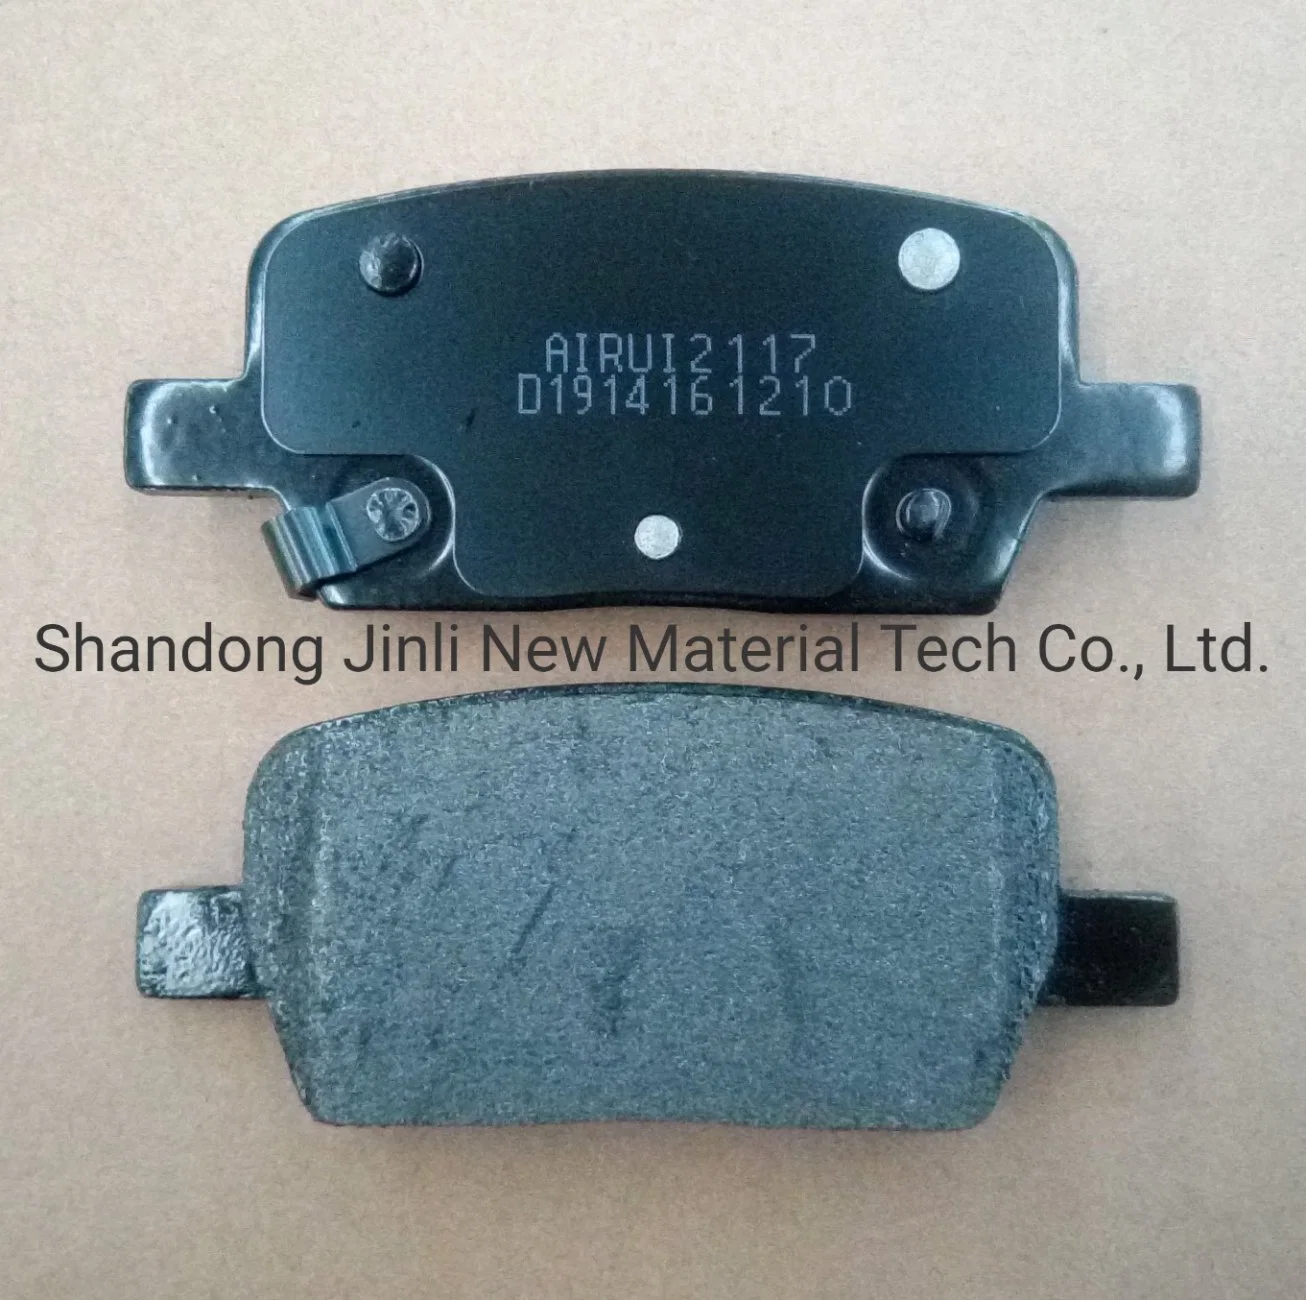 Auto Parts Brake Pad for American Car D1914